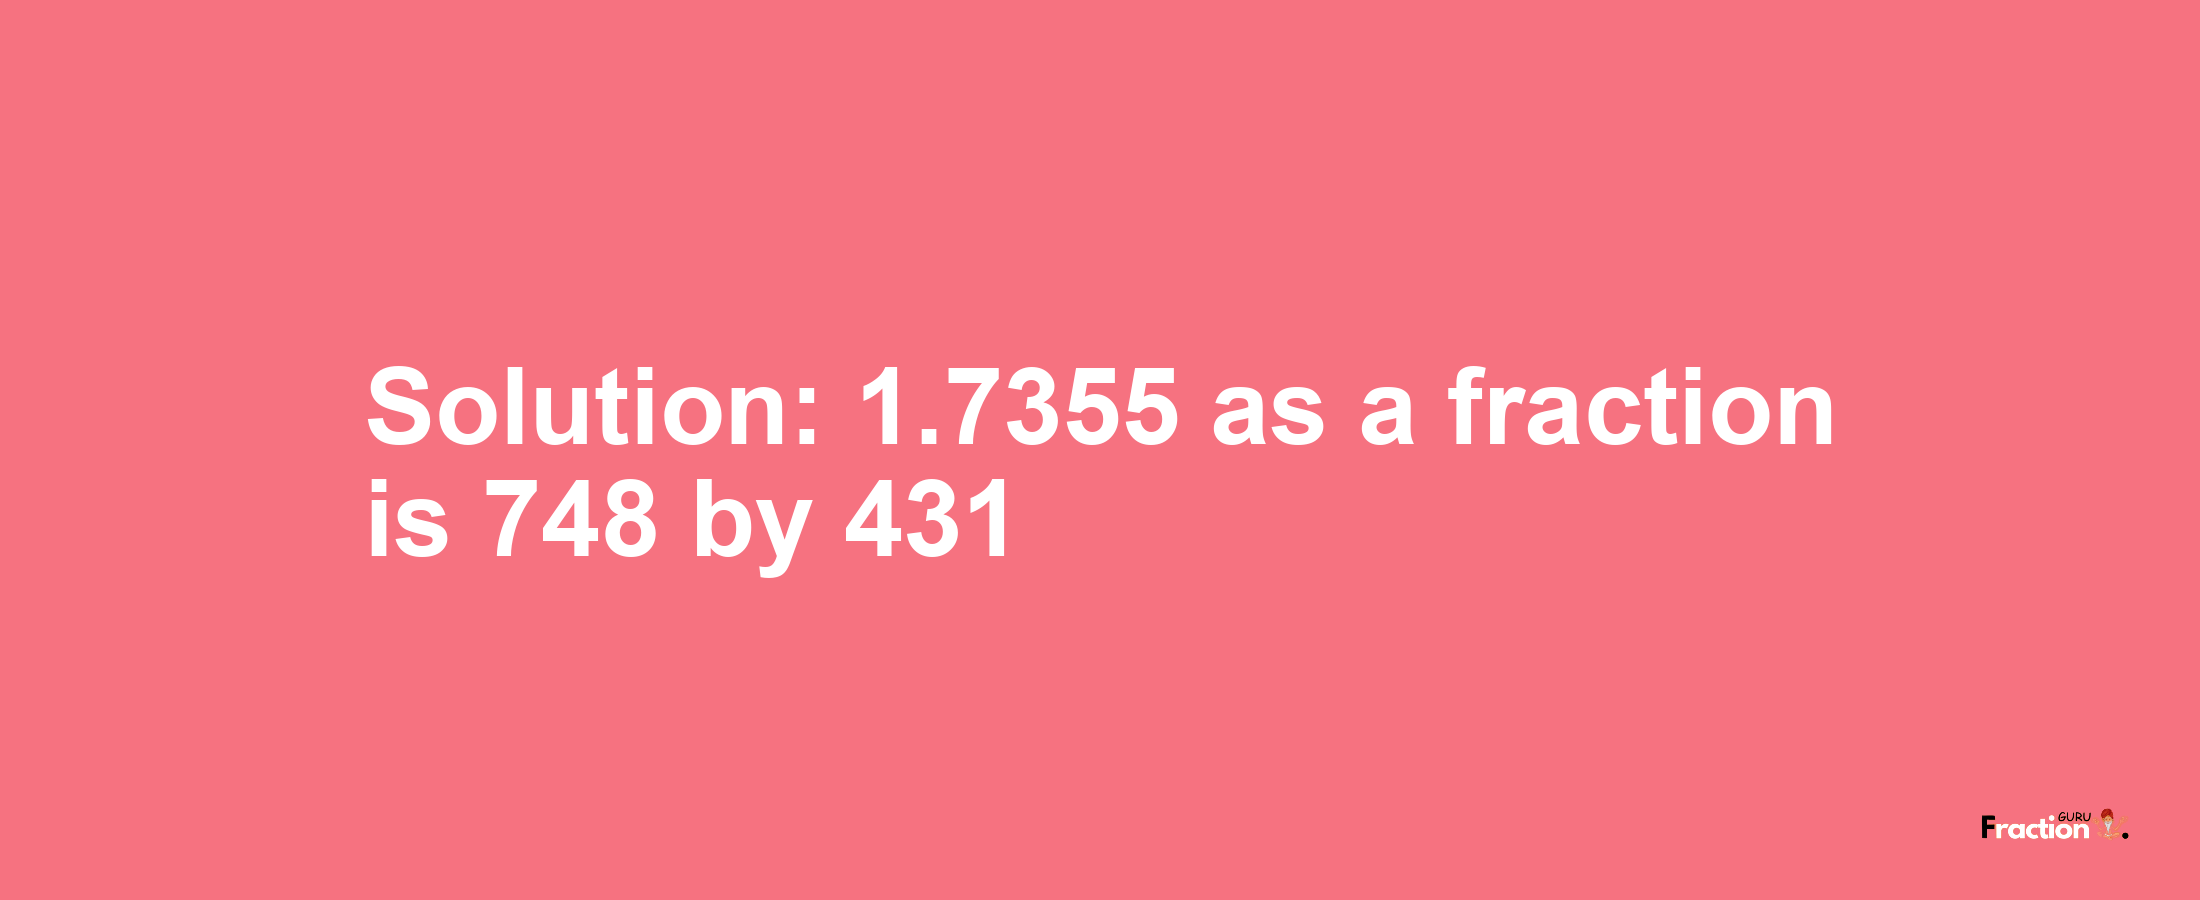 Solution:1.7355 as a fraction is 748/431